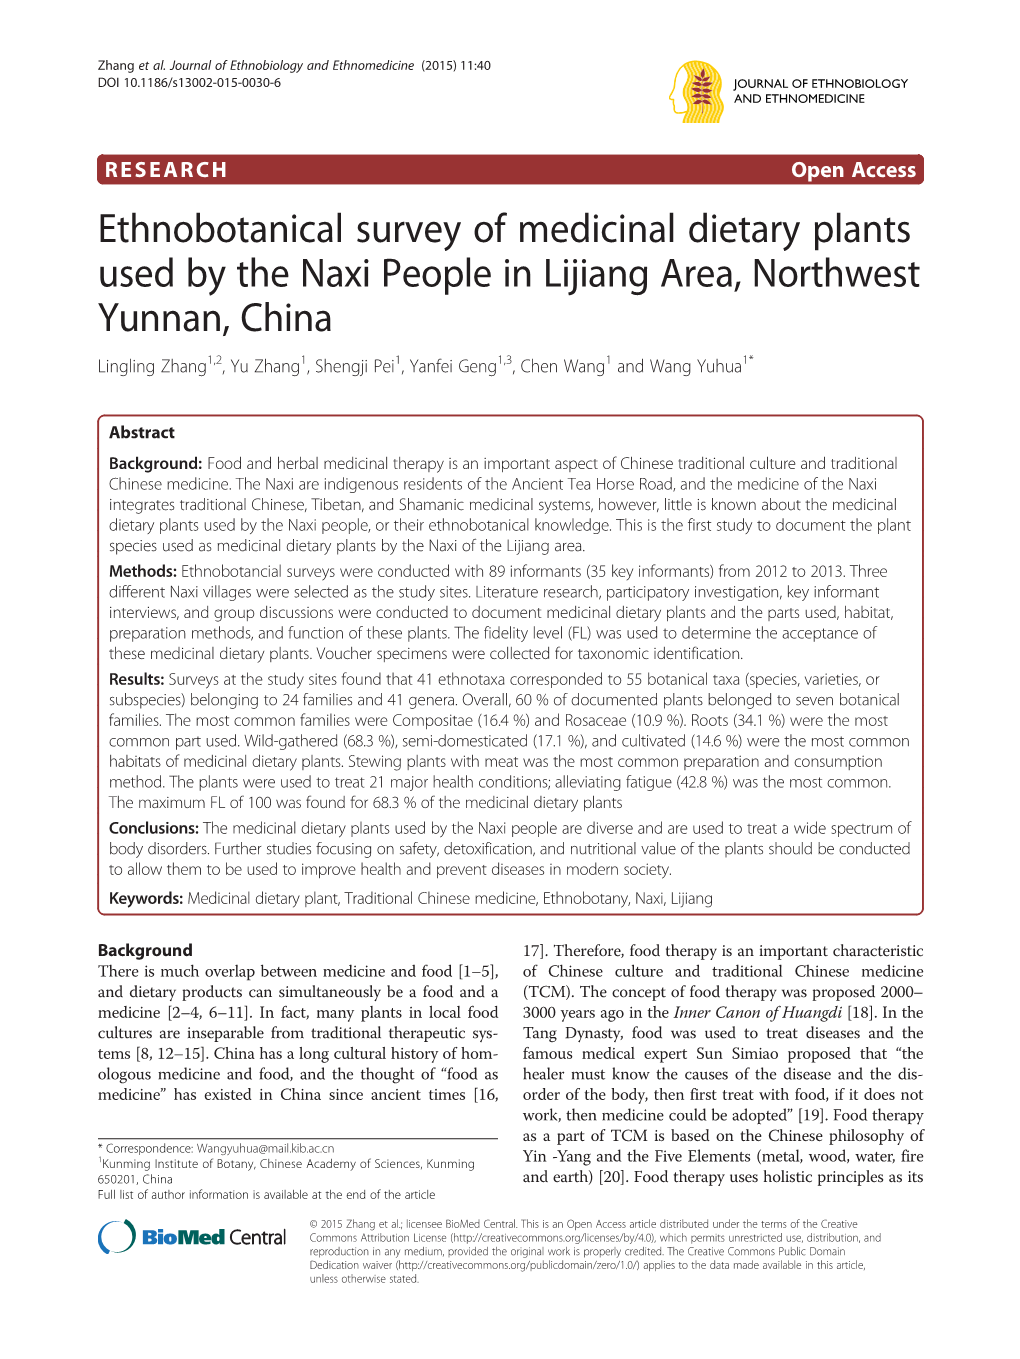 Ethnobotanical Survey of Medicinal Dietary Plants Used by the Naxi